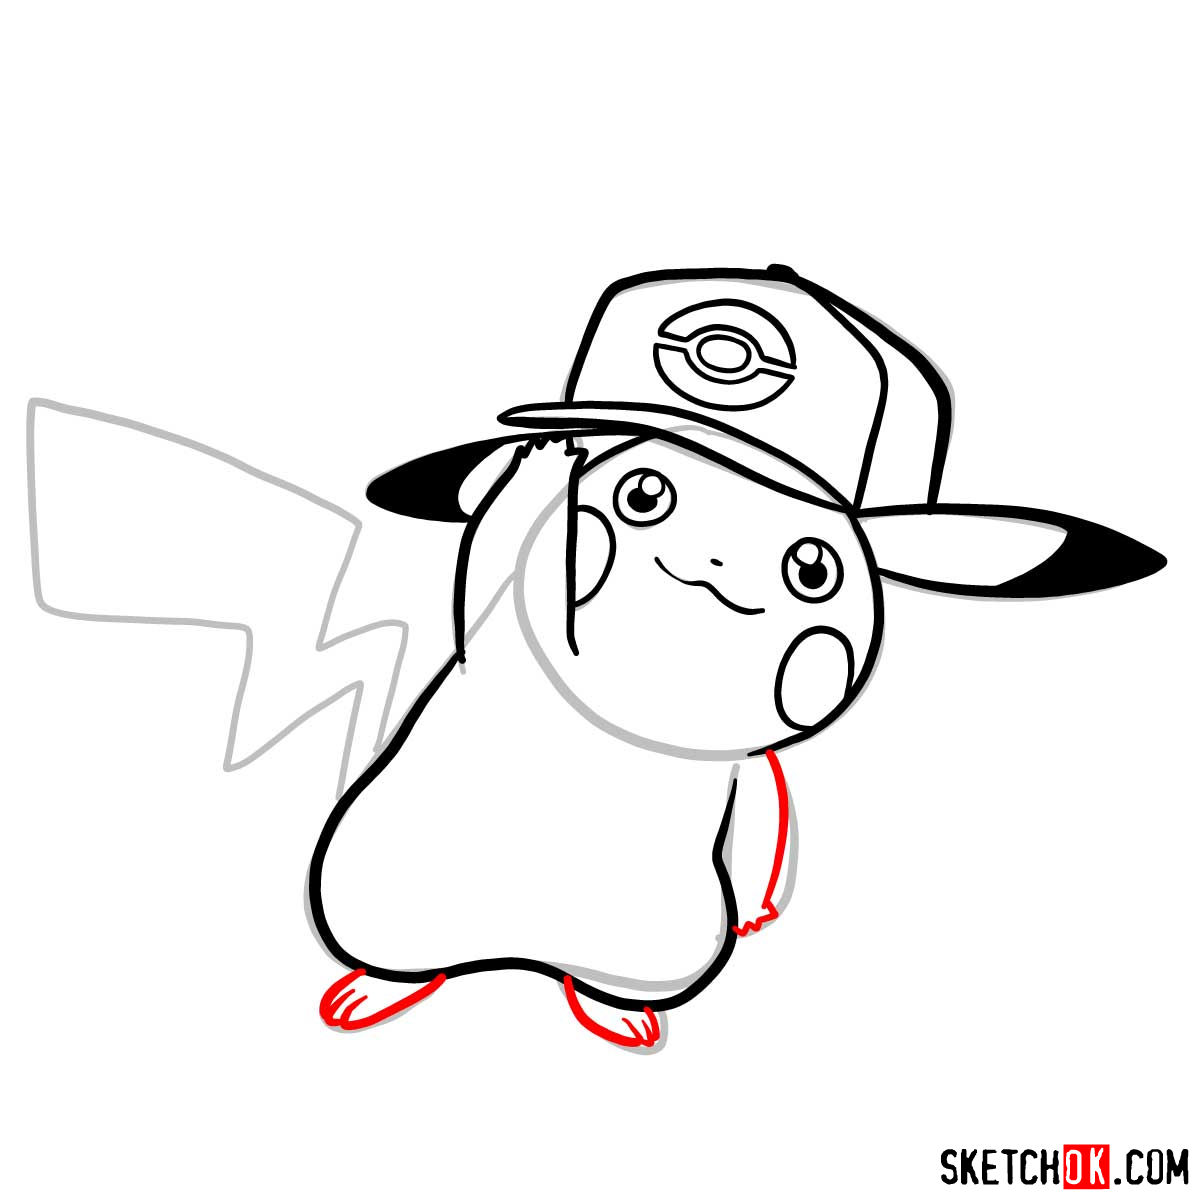 How to draw Pikachu in a cap with pokeball logo - step 07